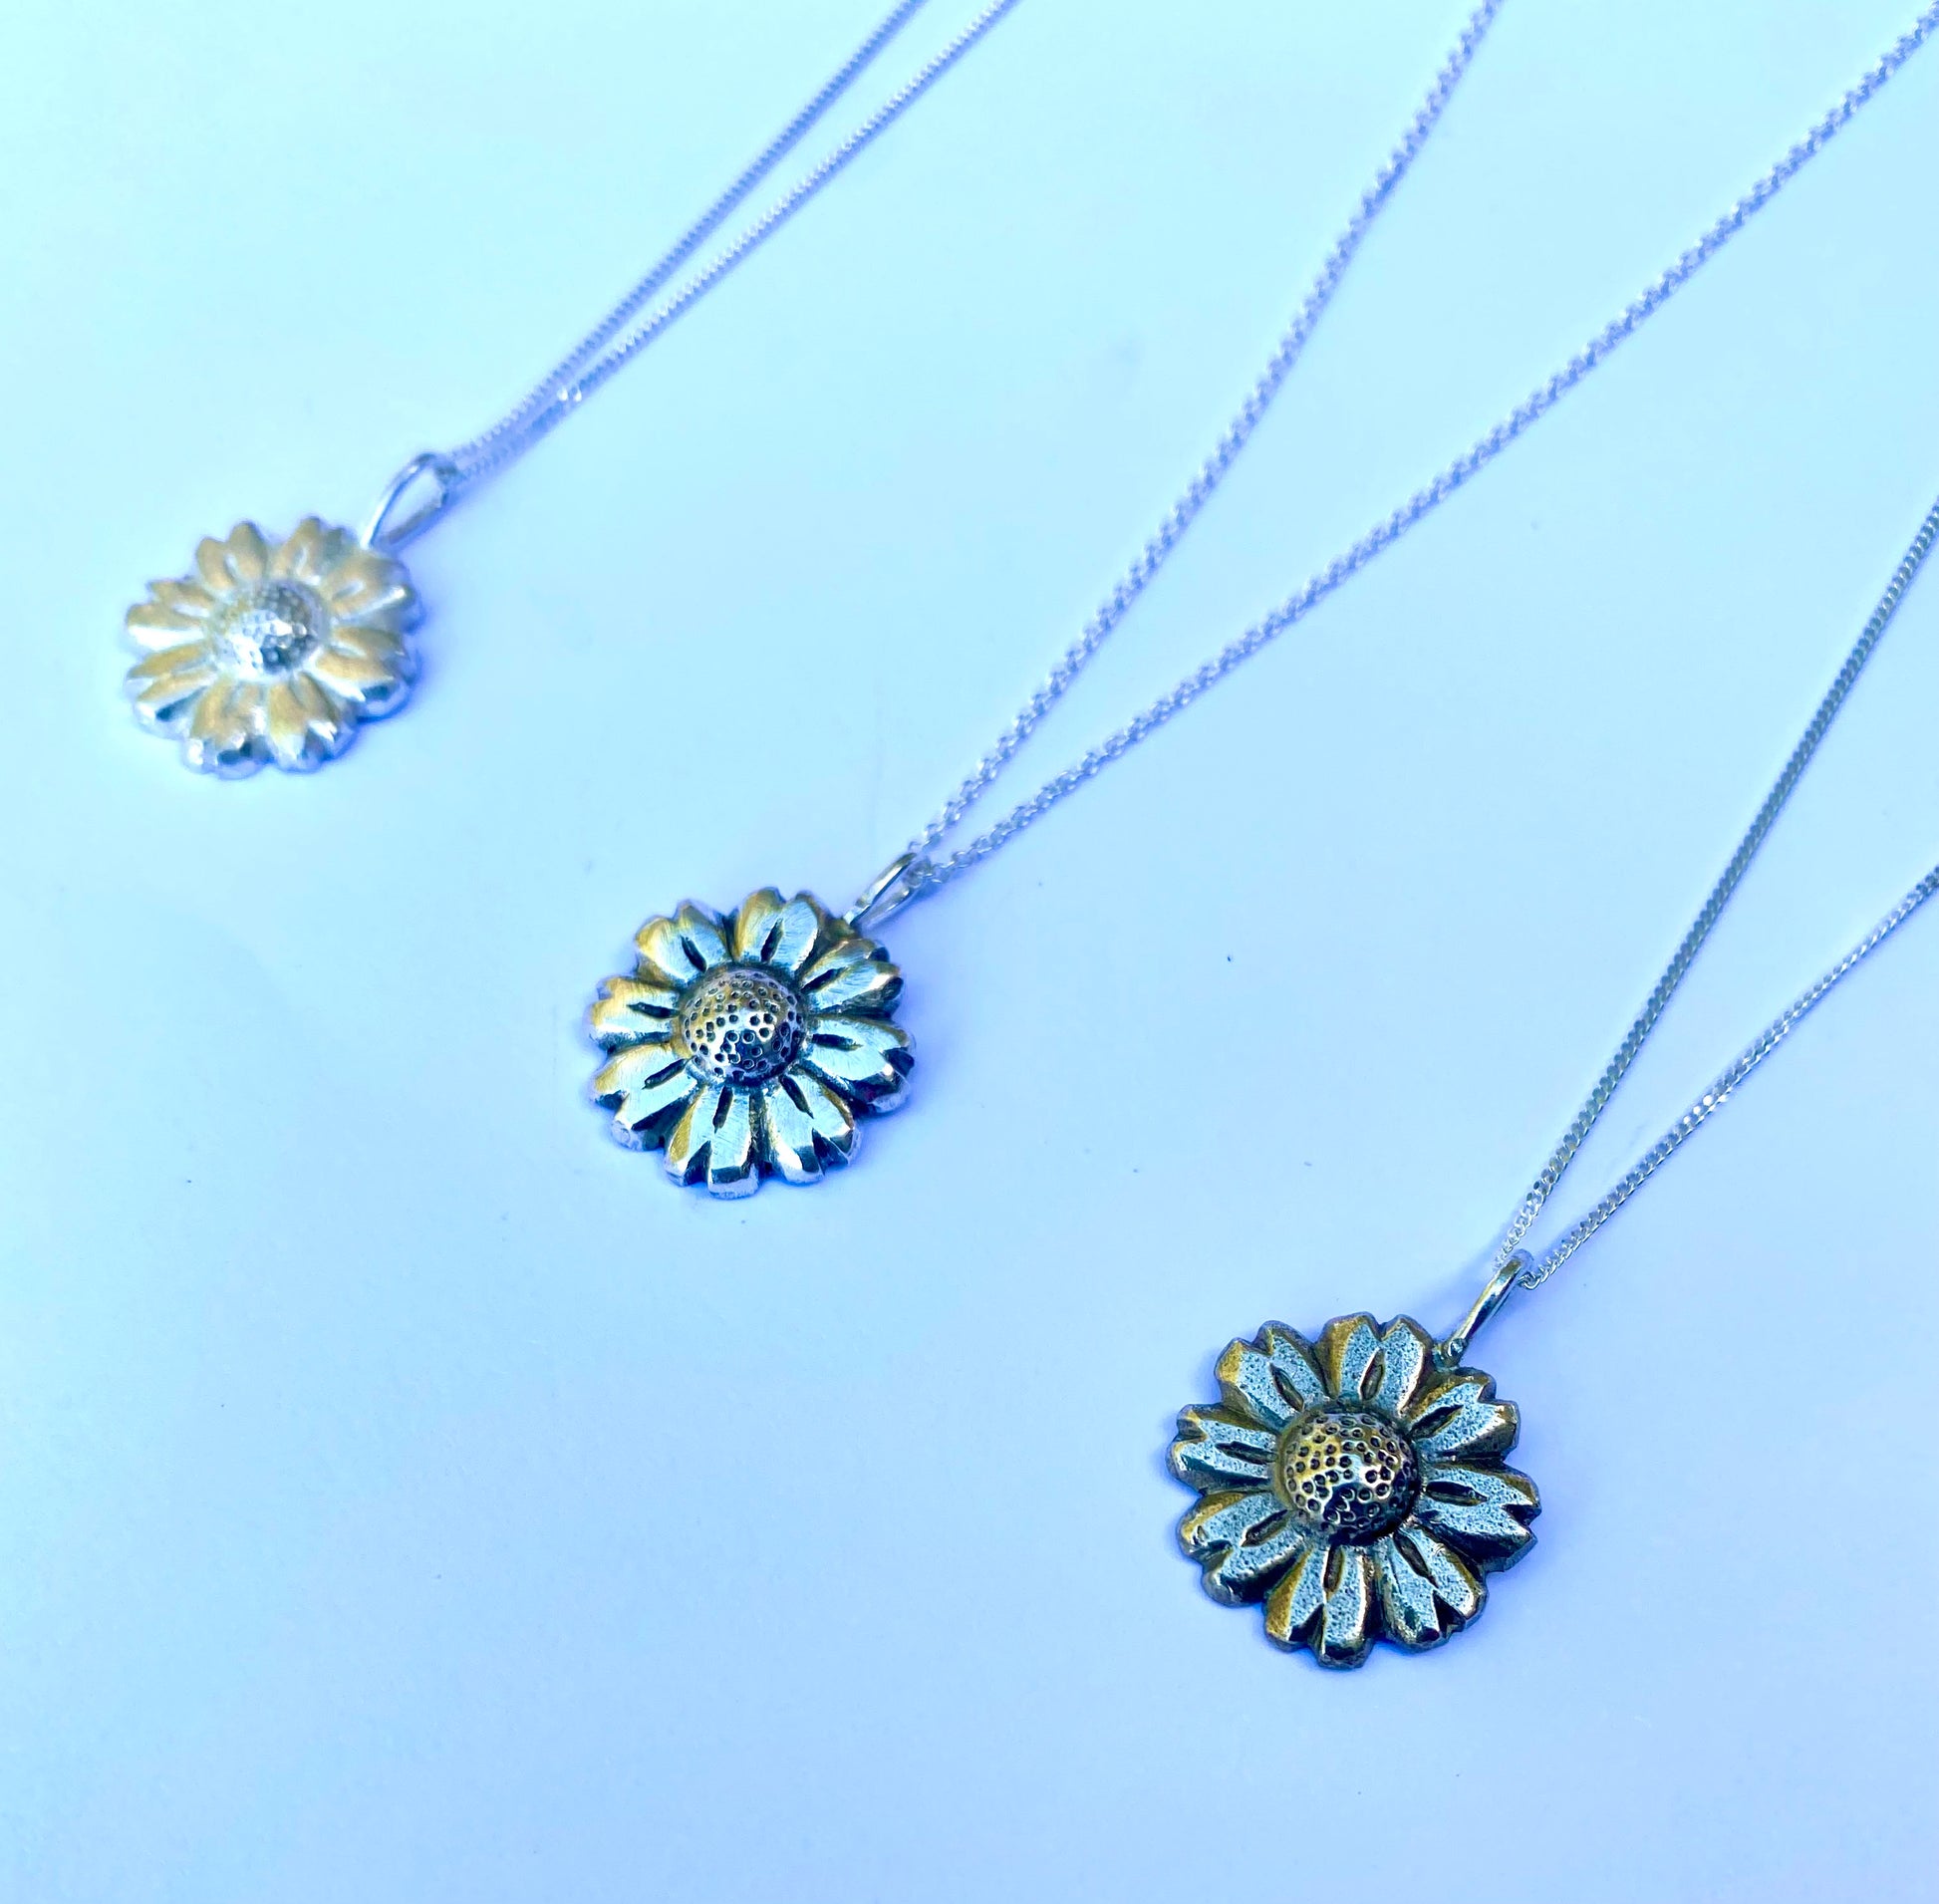 Trio of Daisy Flower pendants in shiny, oxidized, and brass finishes displayed on light blue surface.